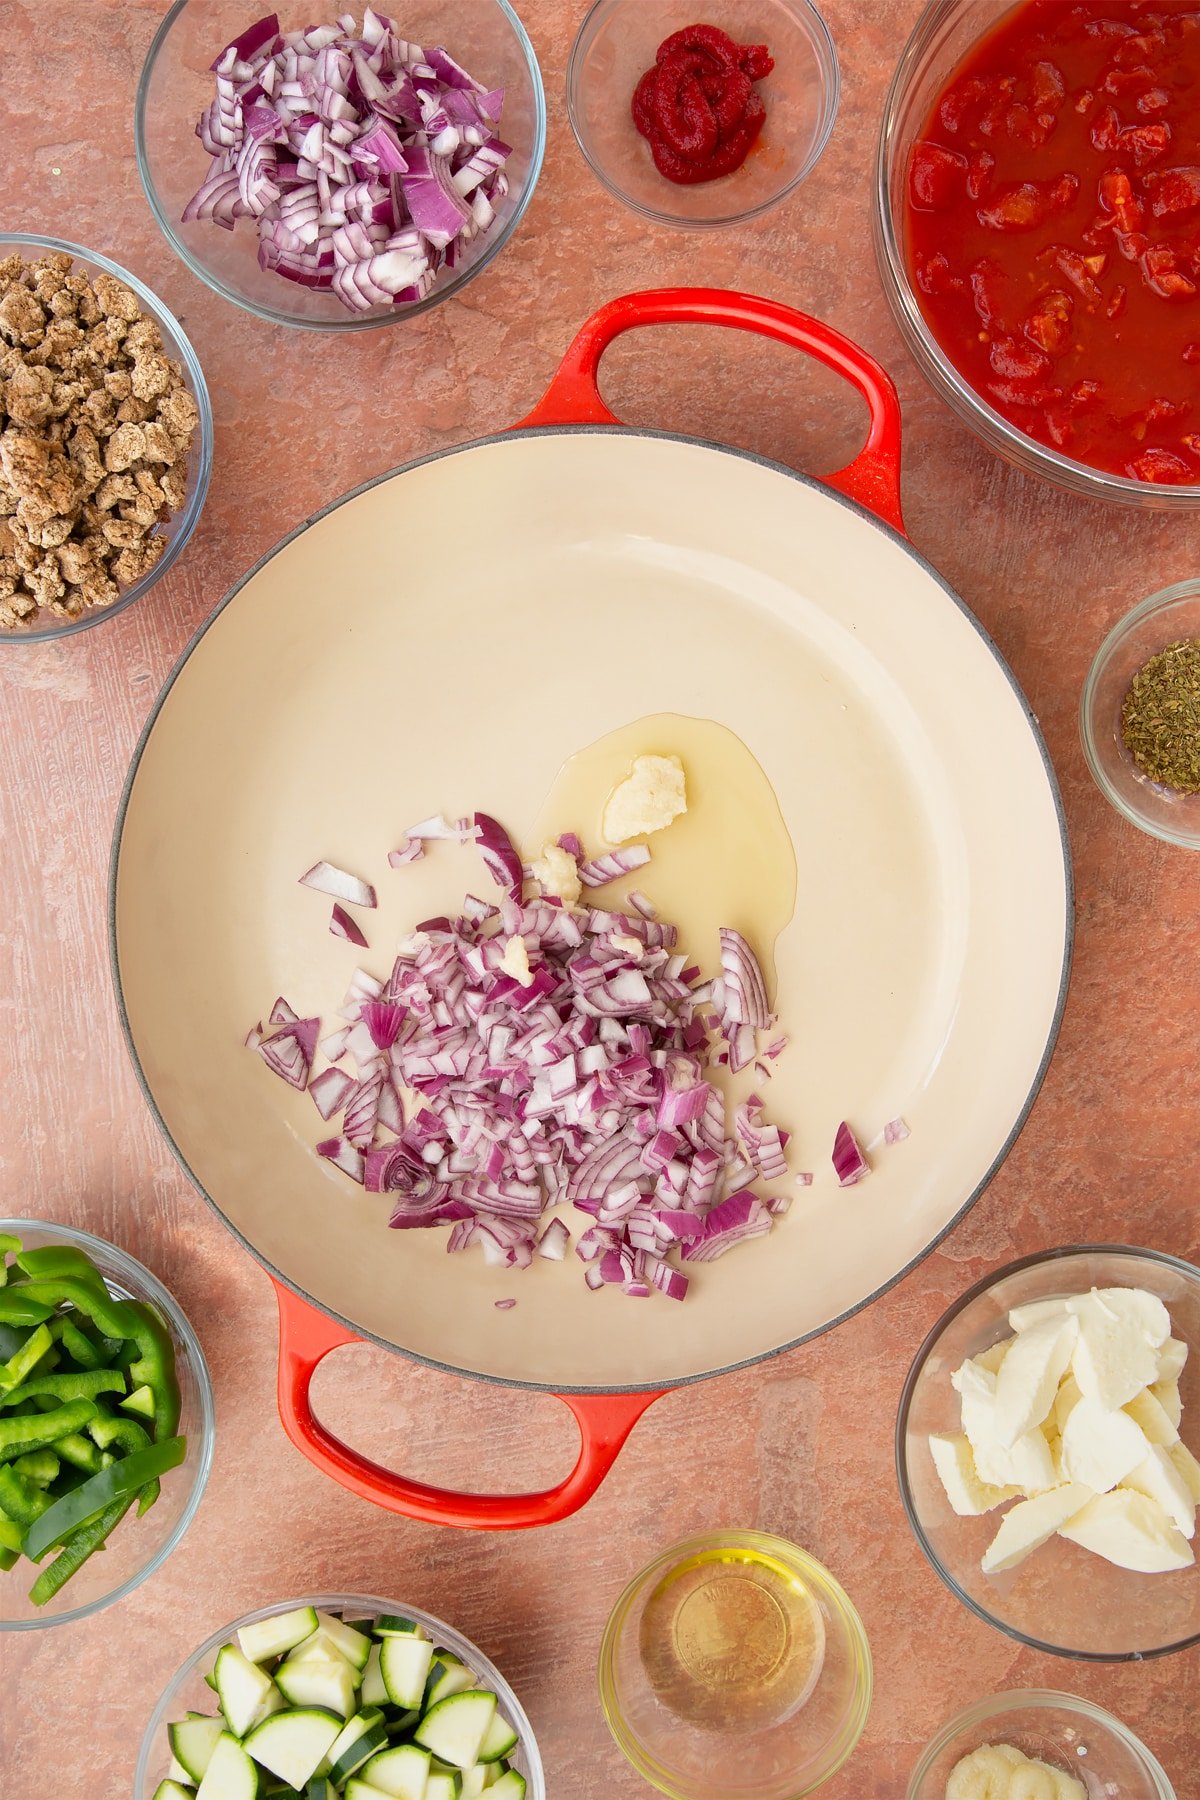 A casserole dish containing oil, chopped red onion and garlic. Ingredients to make bolognese al forno surround the dish.